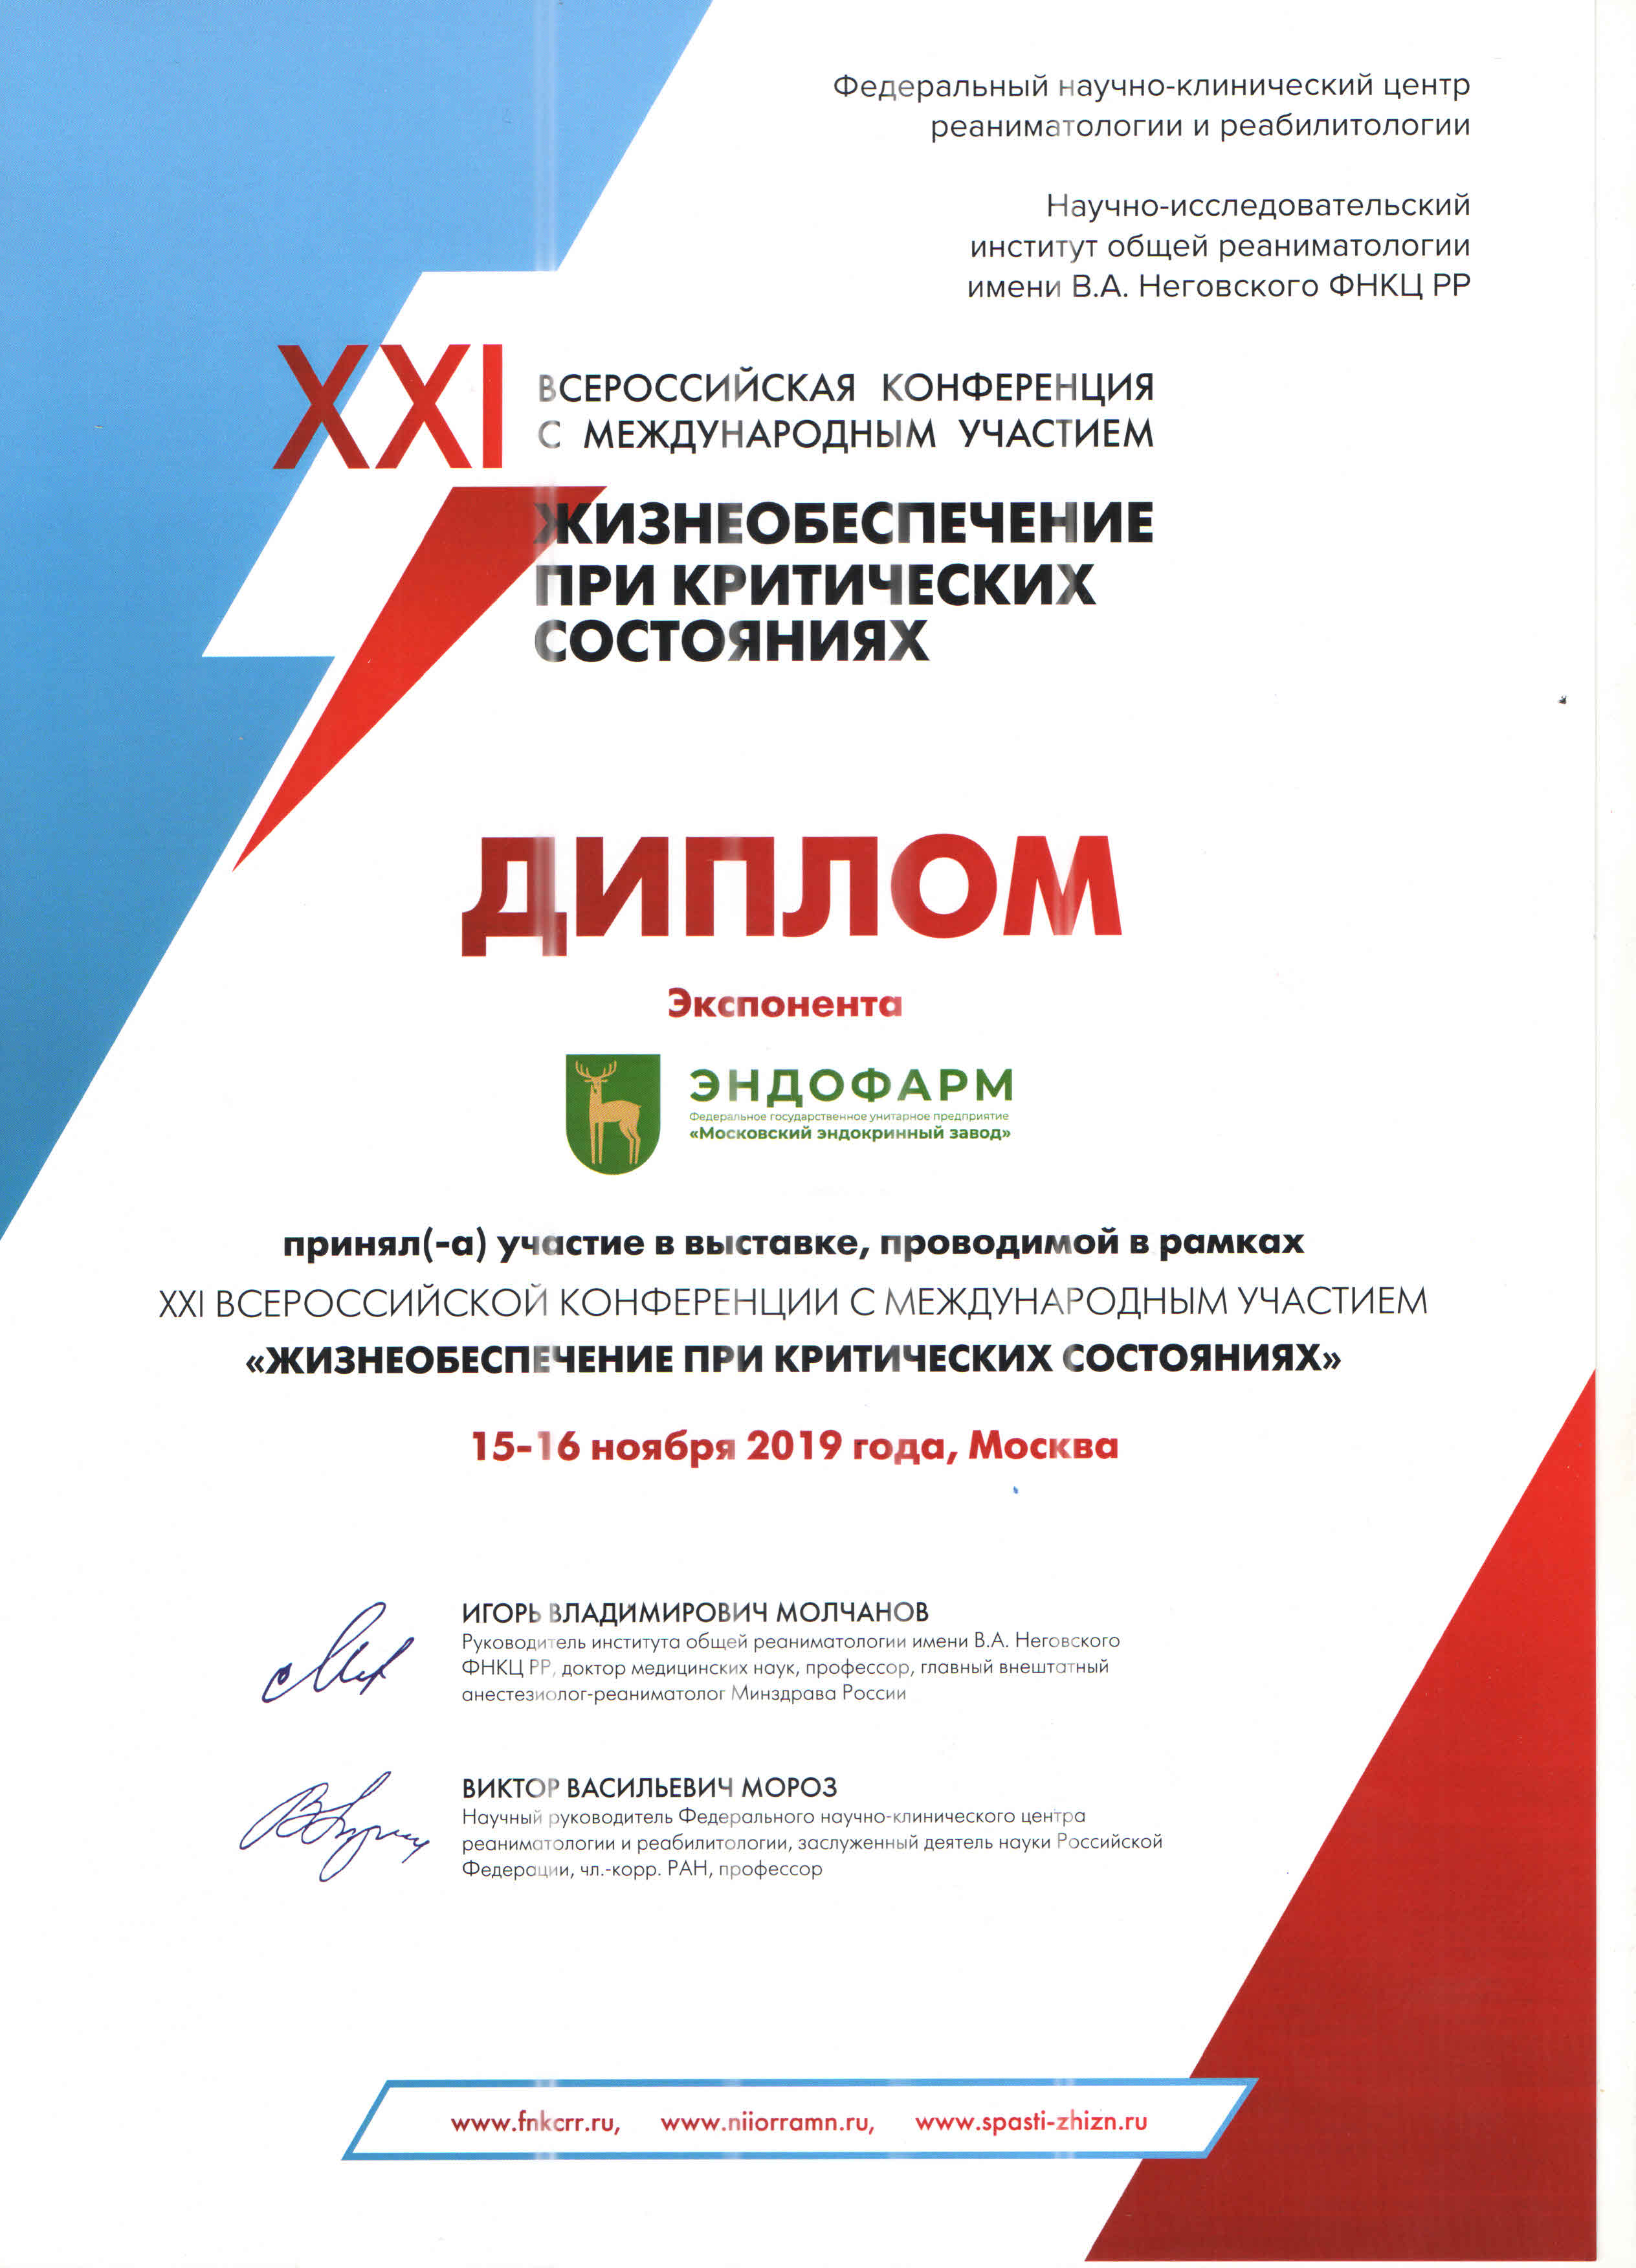 FSUE Moscow Endocrine Plant took part in the XXI All-Russian Conference “Life sustaining in emergency conditions”.